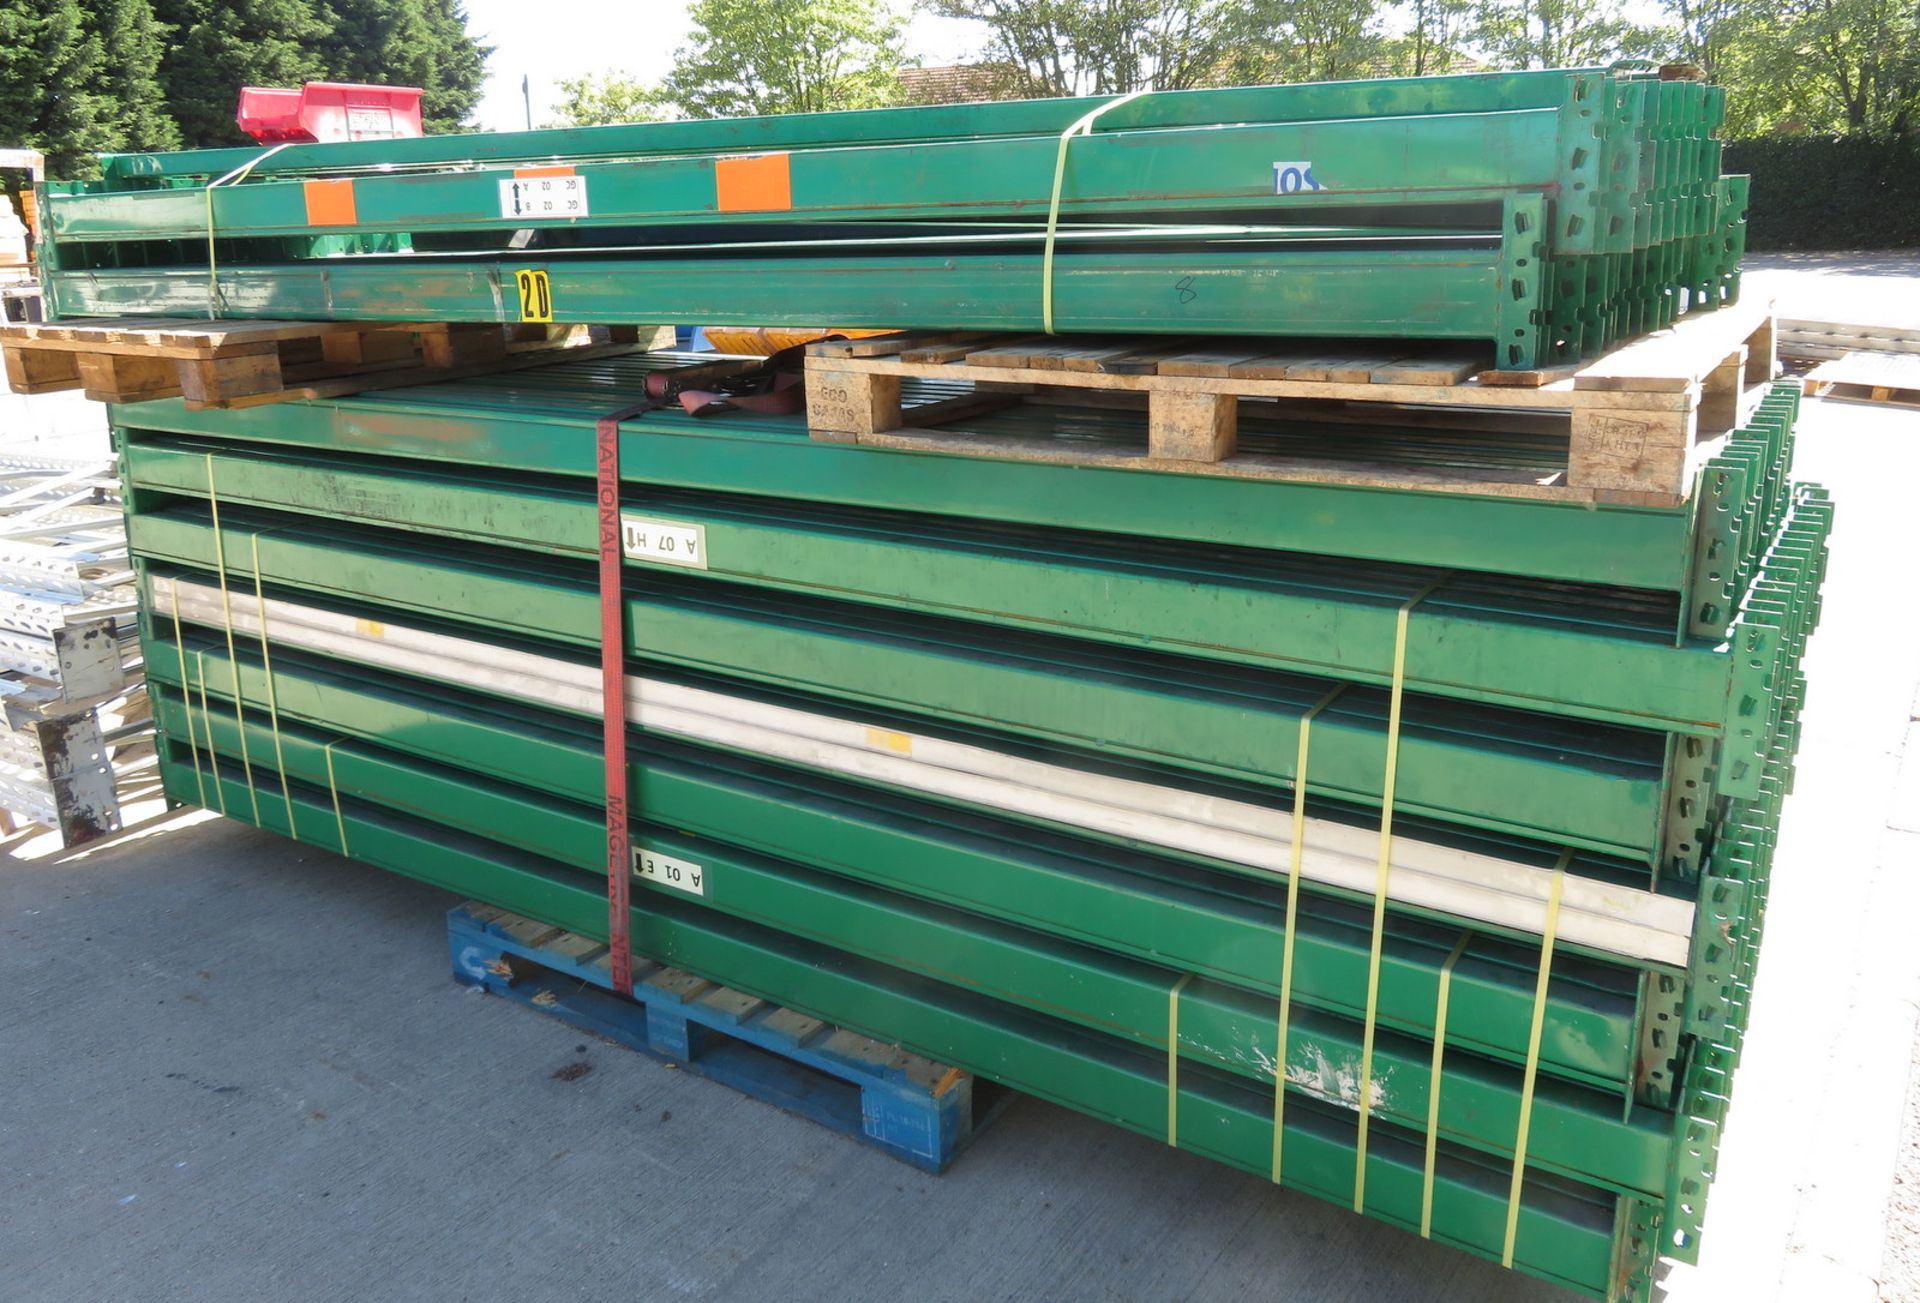 Racking assembly - 19x Uprights - 5700mm high x 1050mm wide, 140x Beams - 3300mm long - Image 2 of 7